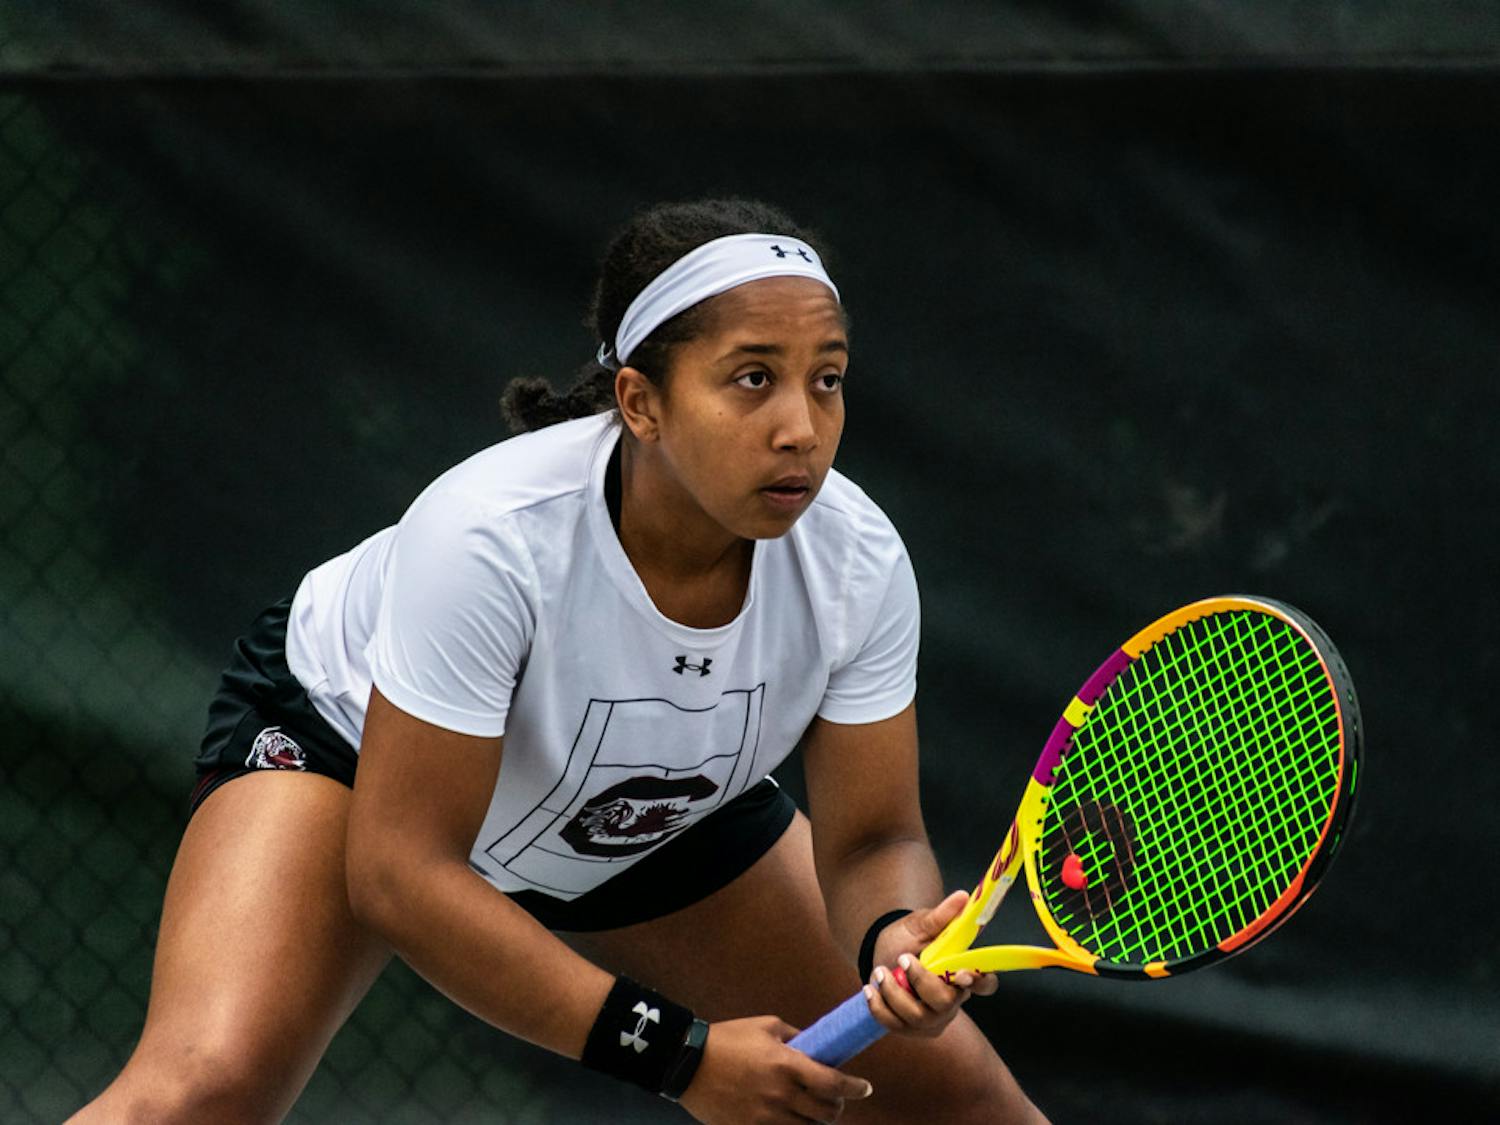 Senior Ayana Akli prepares to hit the ball during the match against Kentucky on March 17, 2023. Akli was named Big Ten Freshman of the Year in 2020 during her time at Maryland and now sits at No. 7 in the ITA women's singles rankings.